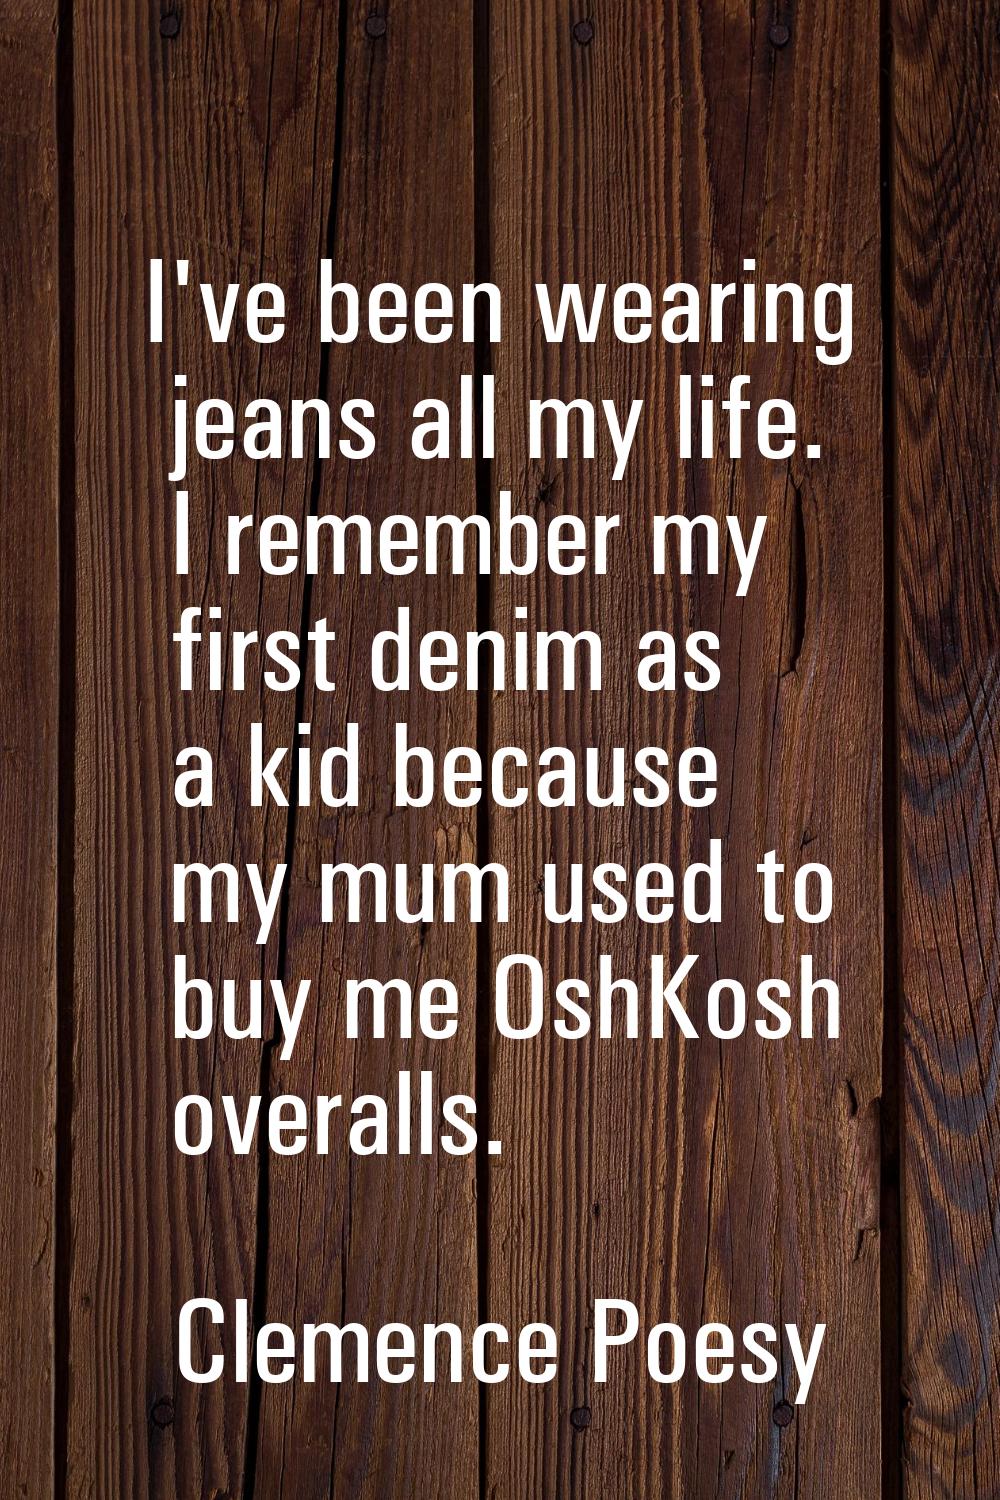 I've been wearing jeans all my life. I remember my first denim as a kid because my mum used to buy 